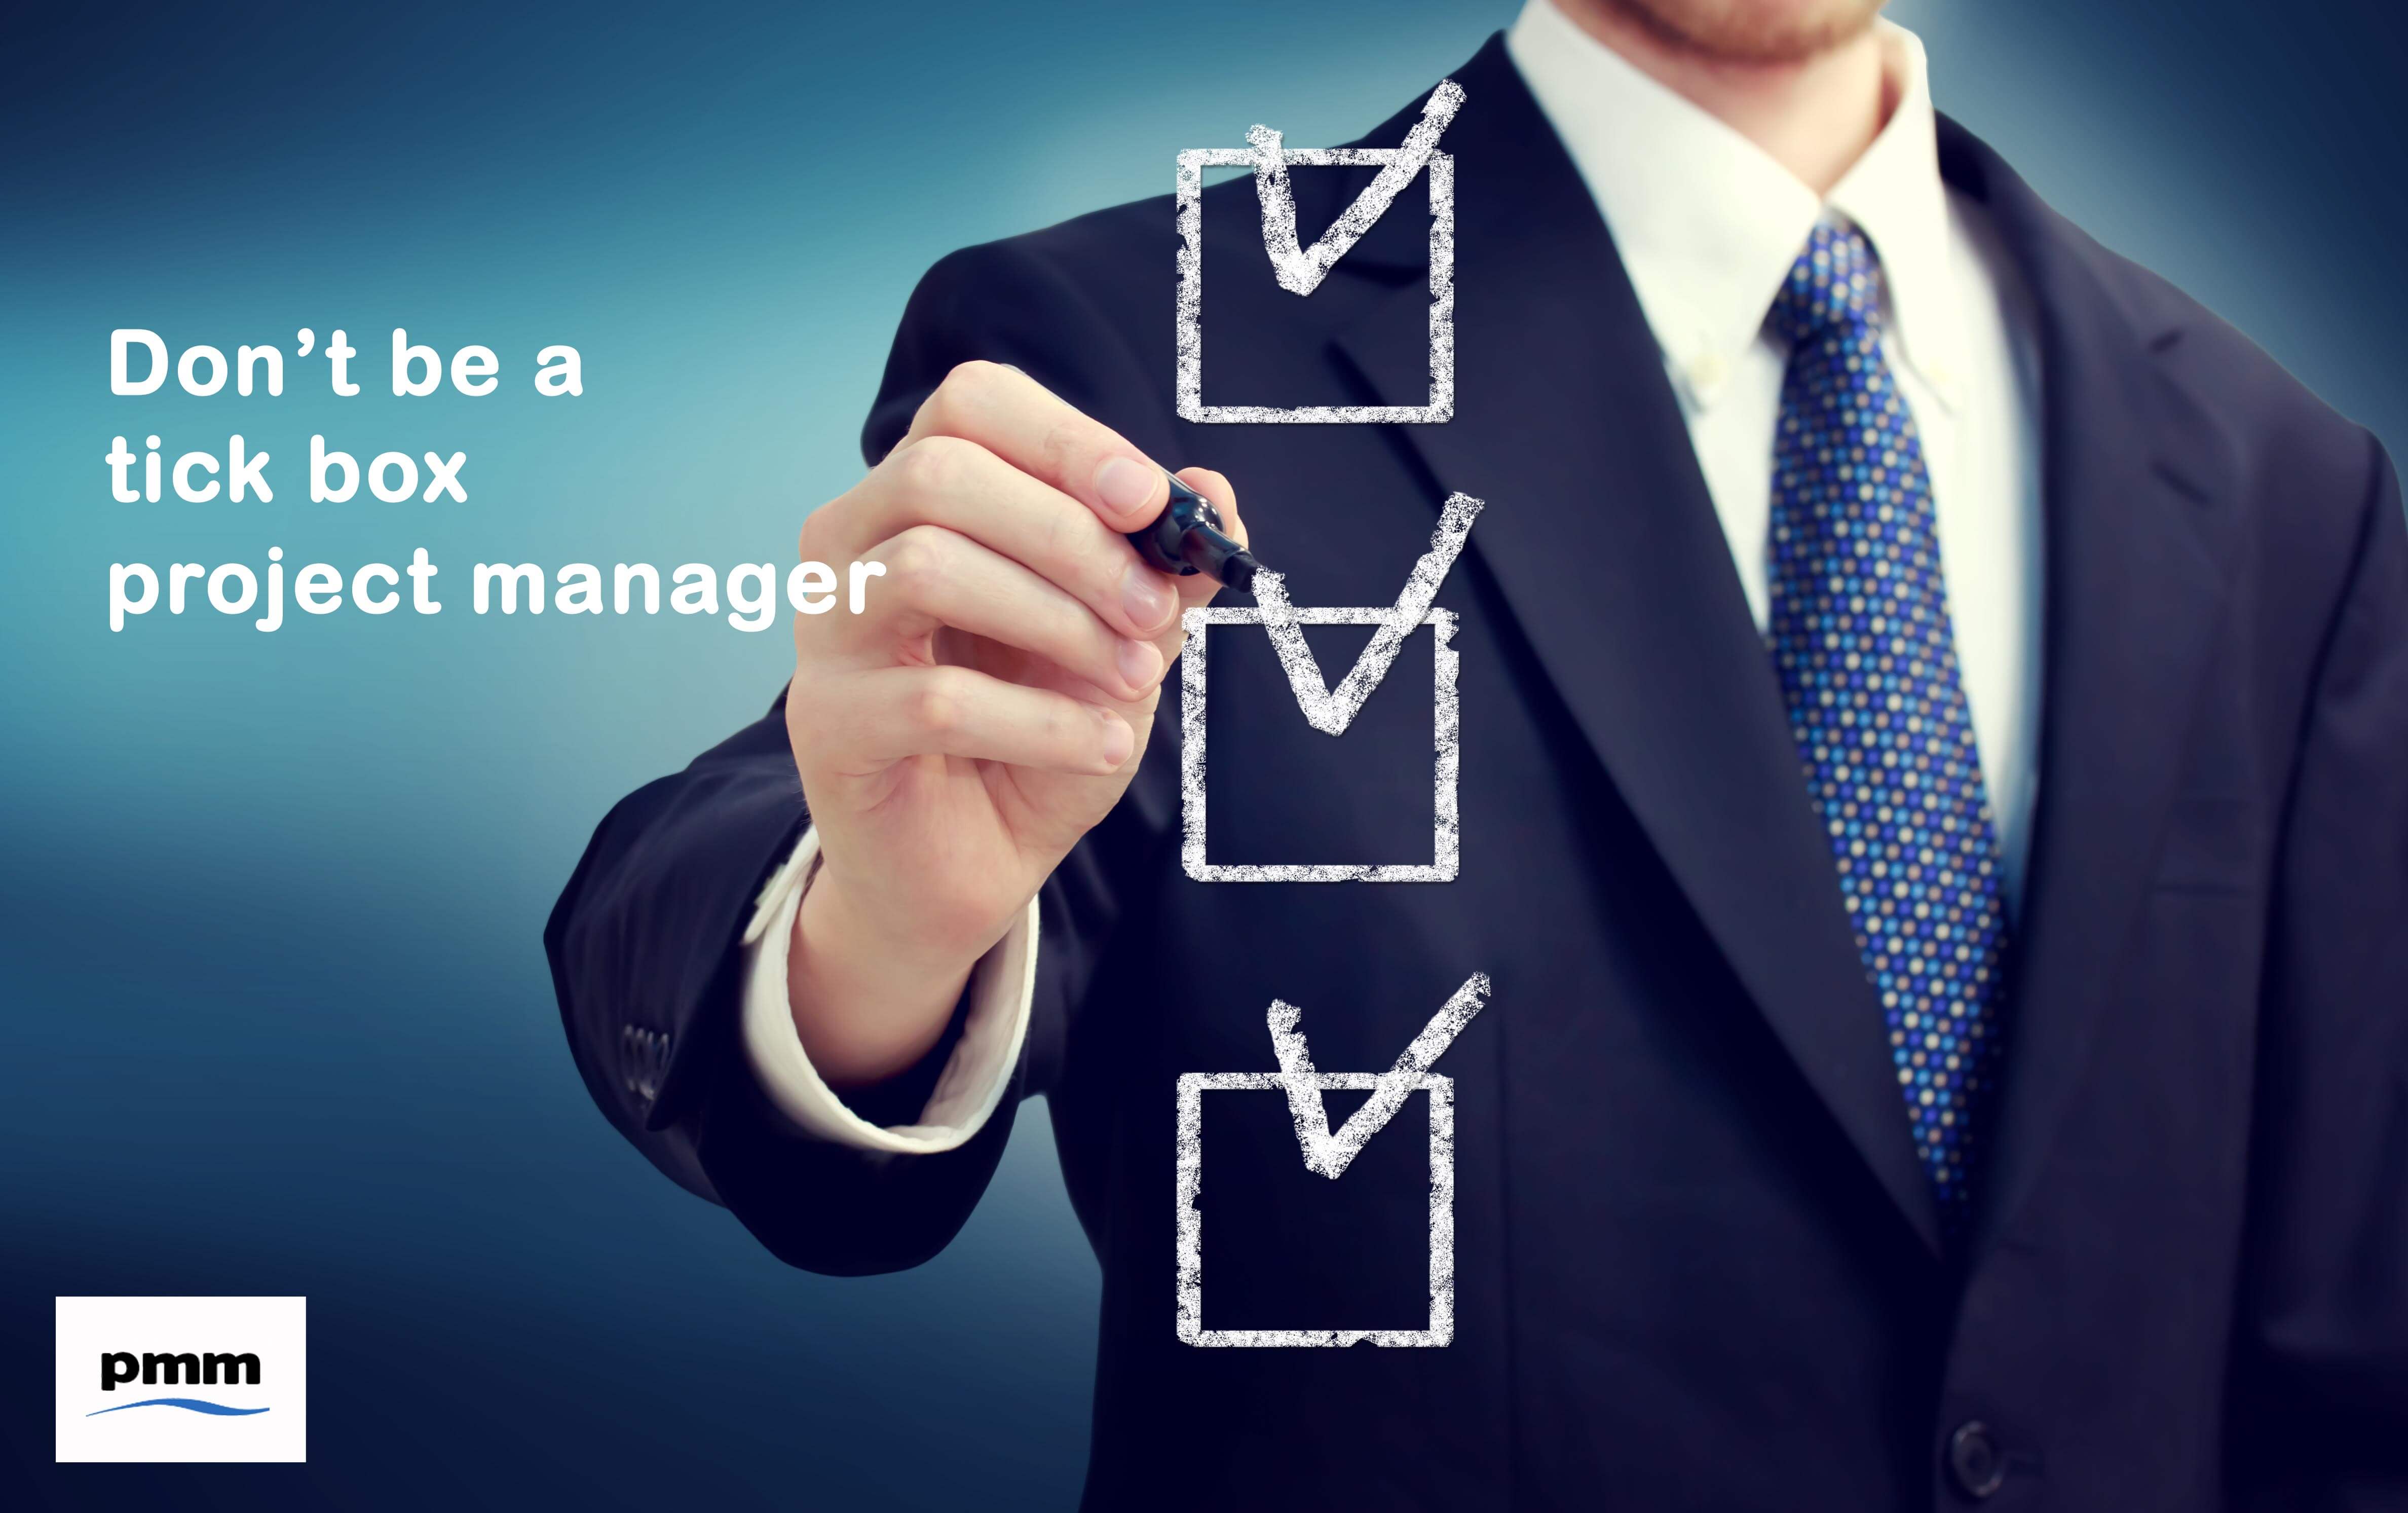 Don’t be a tick box project manager